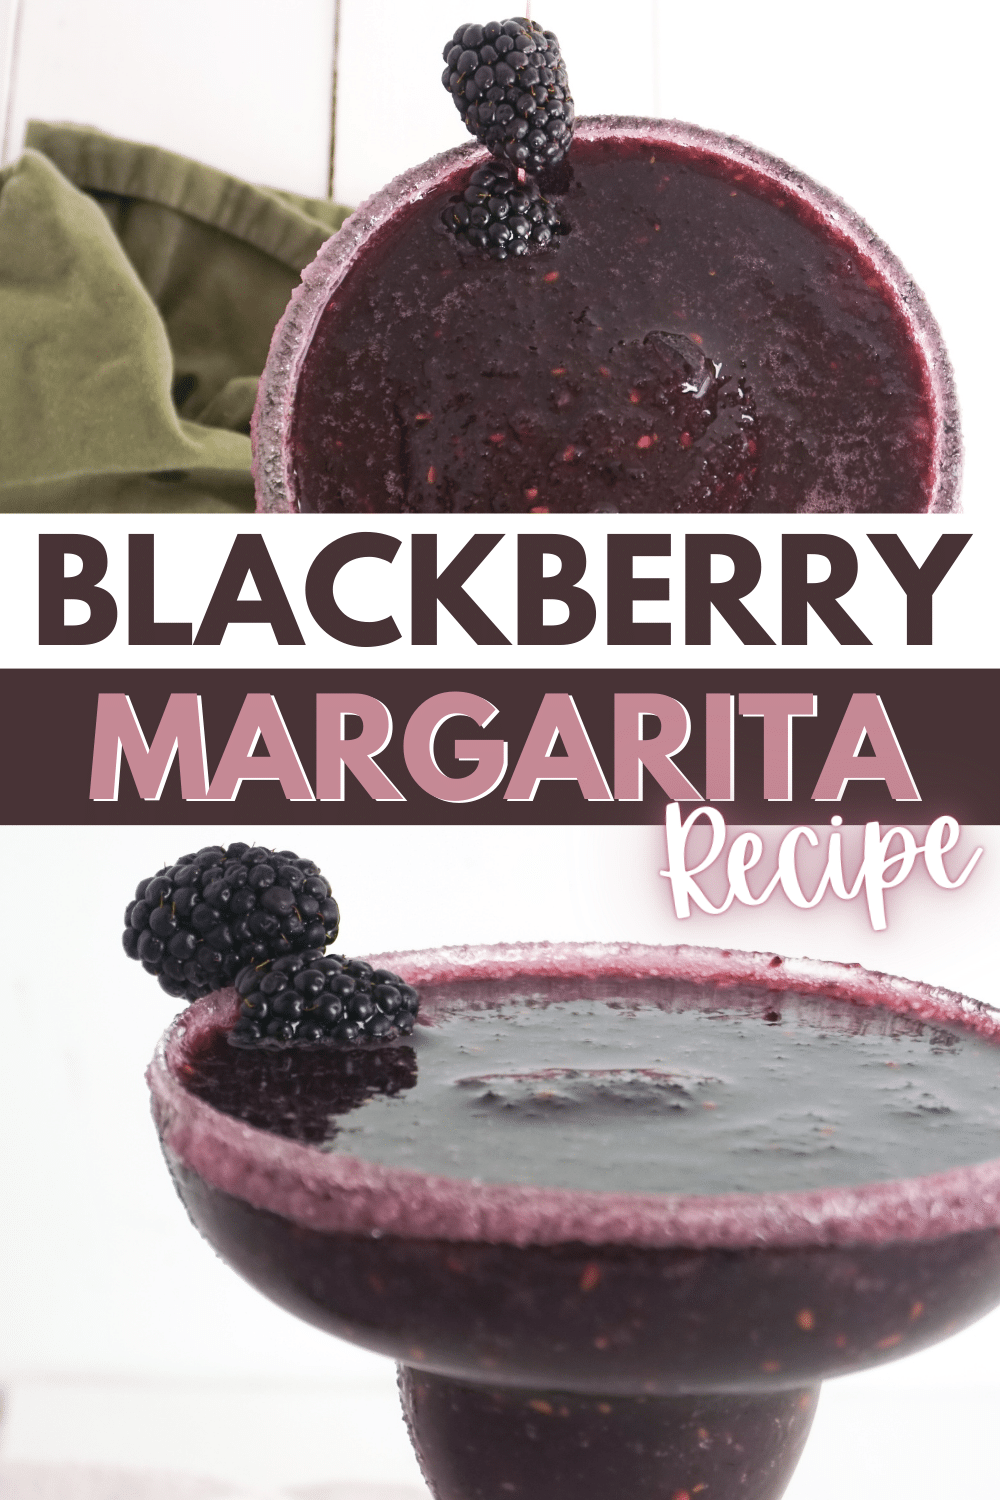 This Blackberry Margarita Recipe is a twist on a classic cocktail that’s easy to make. This drink is perfect for Cinco De Mayo or warm days. #blackberrymargaritarecipe #blackberrymargarita #blackberrymargaritas #margarita #blackberries via @wondermomwannab